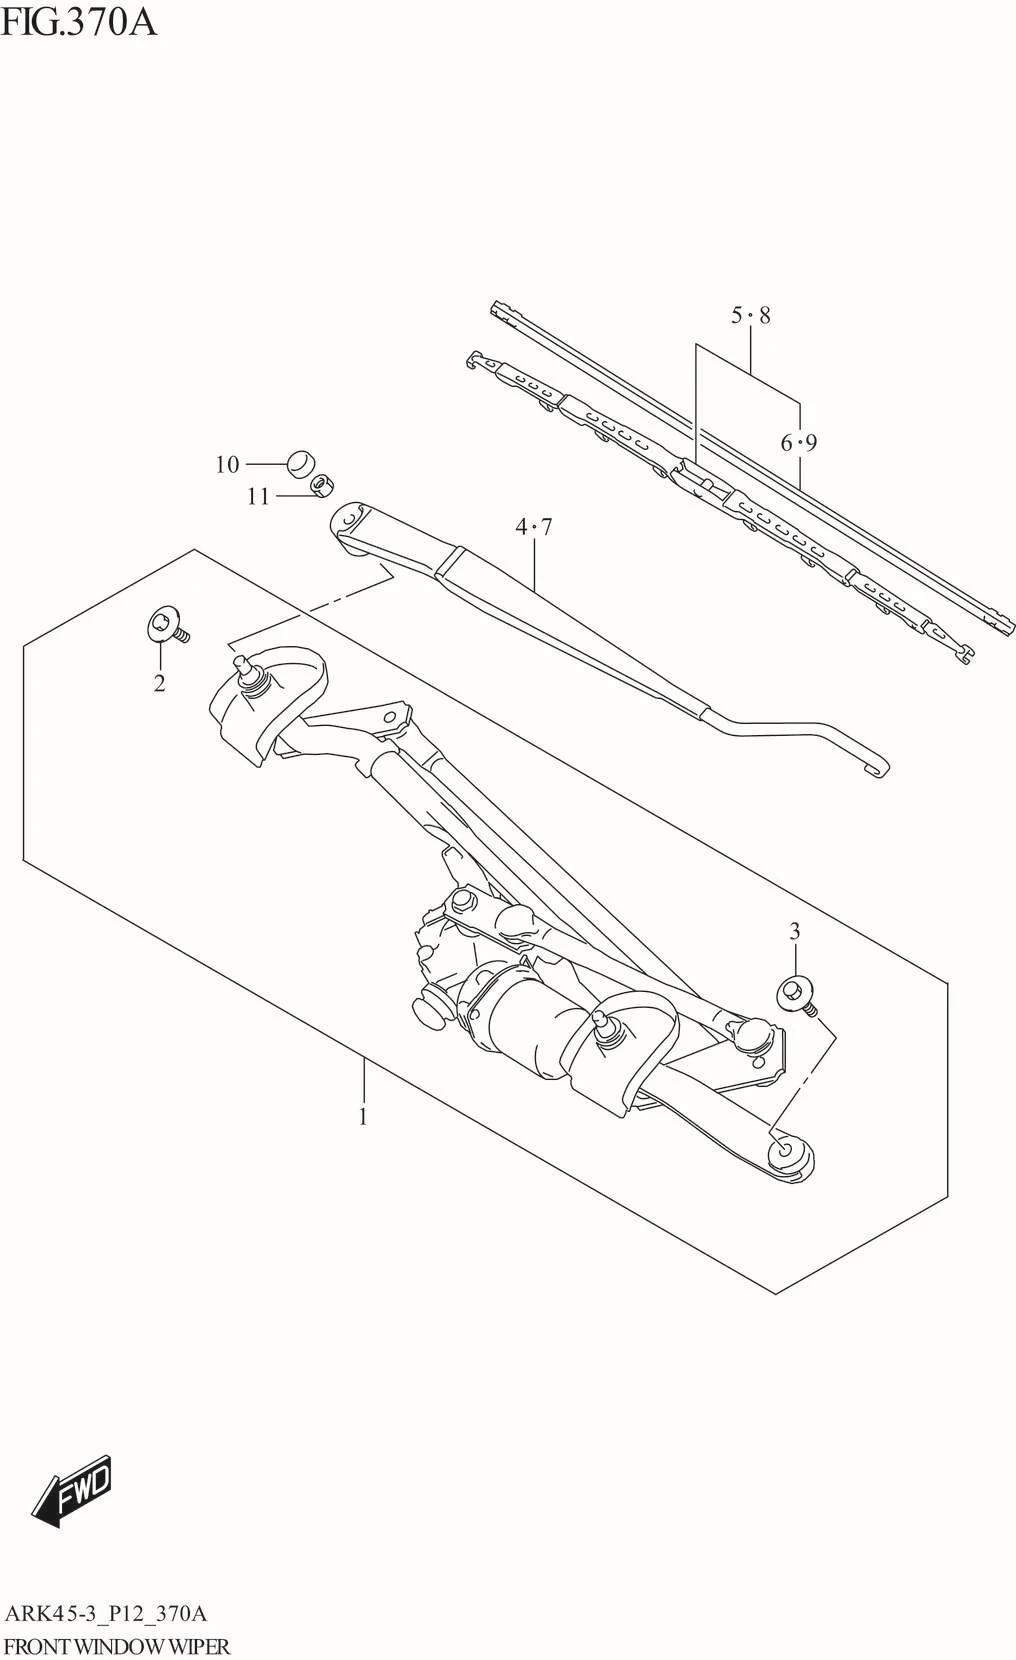 FIG. 370A FRONT WINDOW WIPER